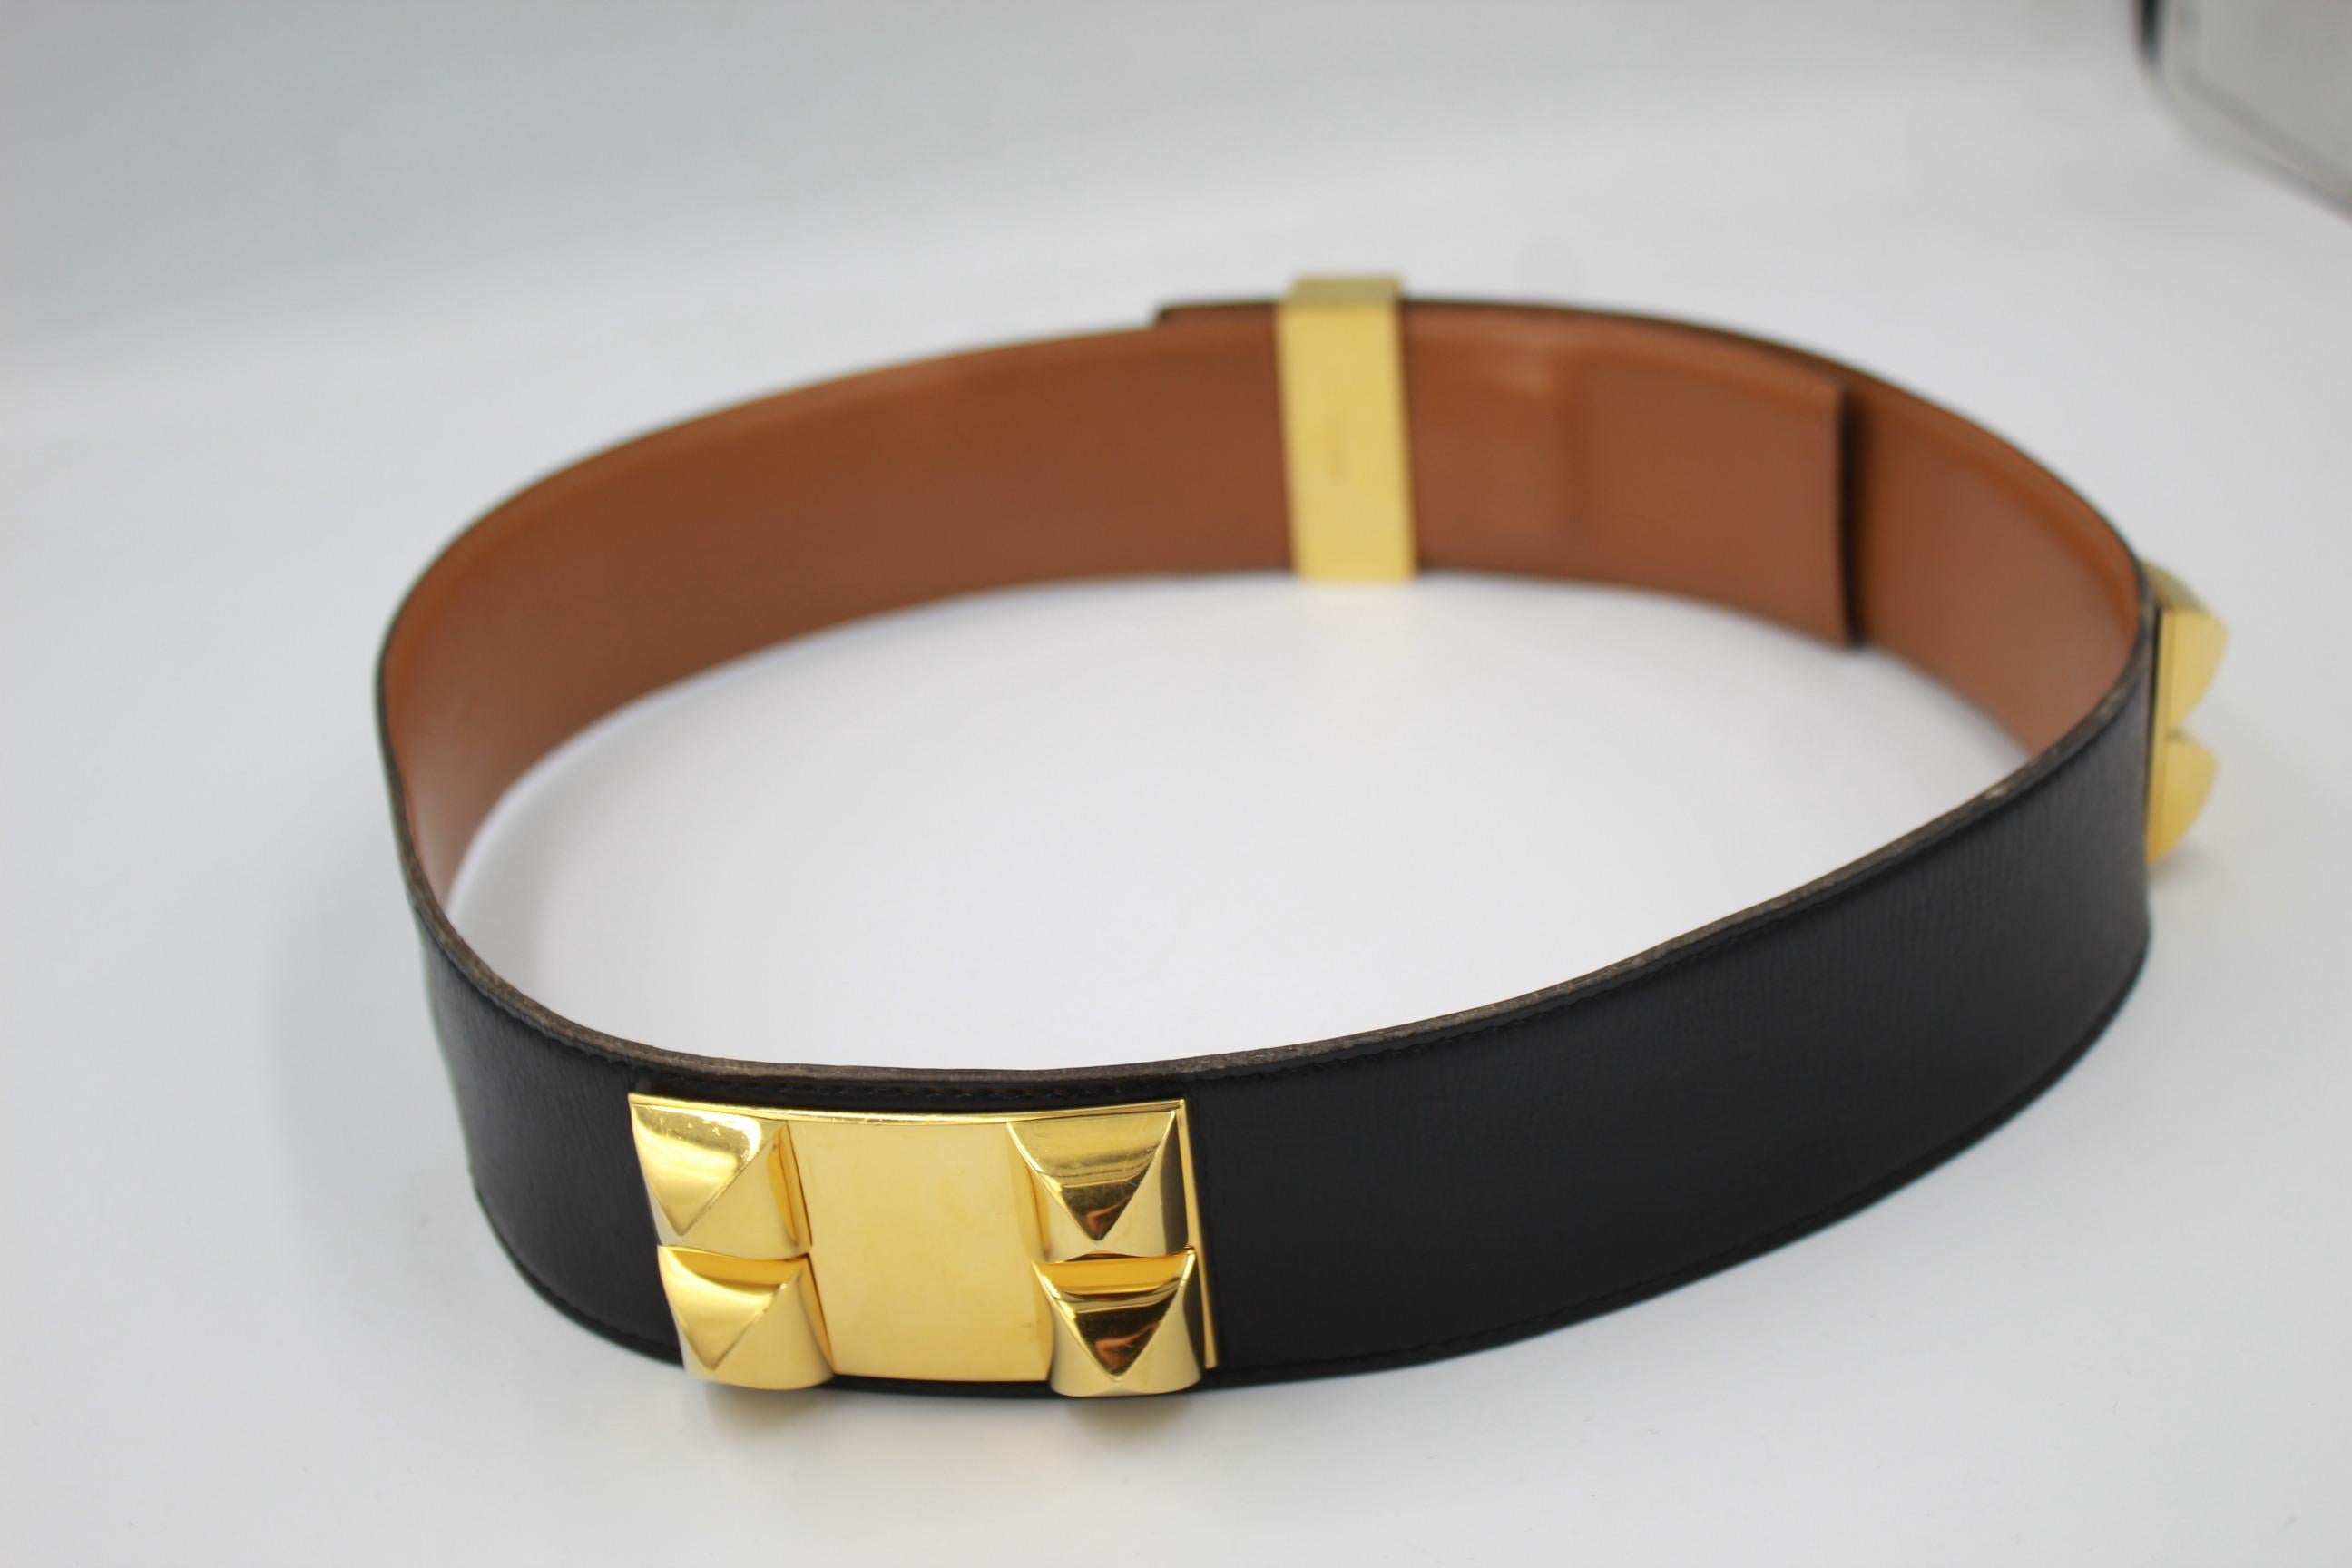 Hermes medor belt in black leather and gold finishes
good condition, with light signs of wear
size 72